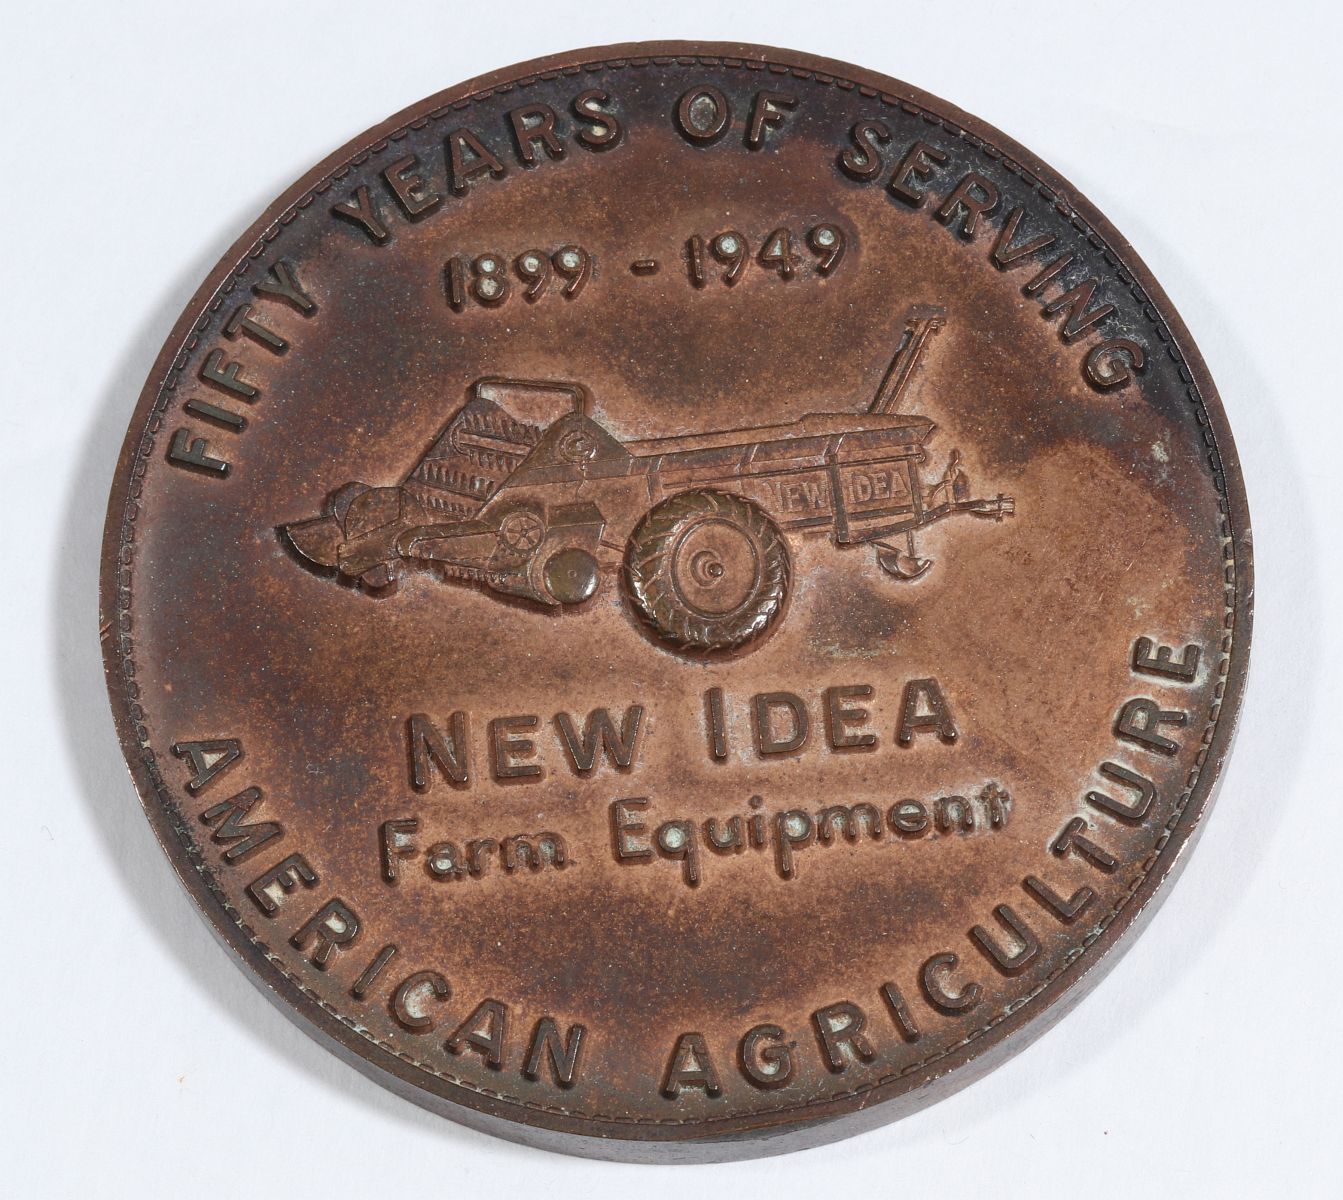 NEW IDEA IMPLEMENT 1949 ADVERTISING PAPERWEIGHT